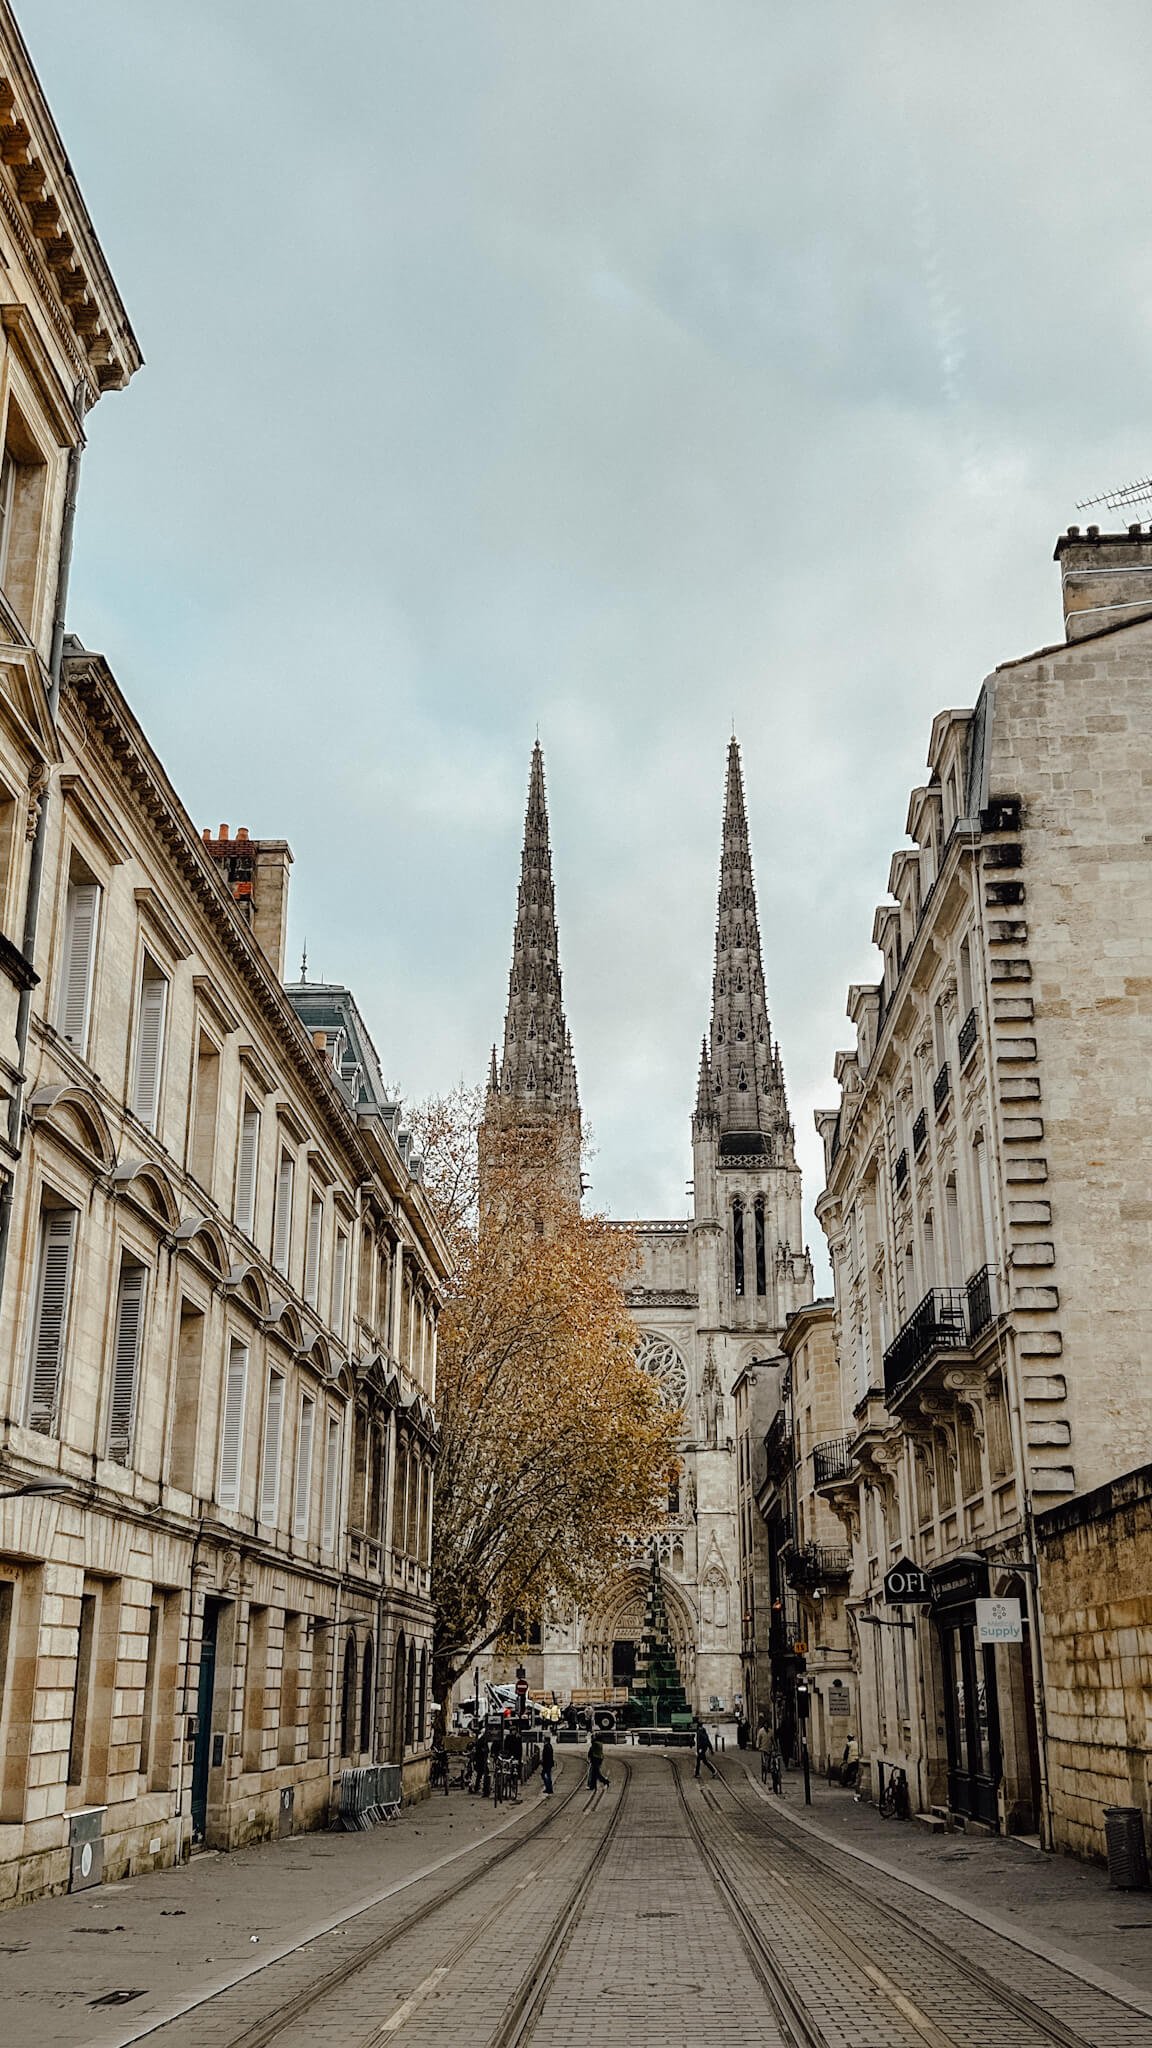 bordeaux-things-to-see-bordeaux-cathedral-spires.jpg